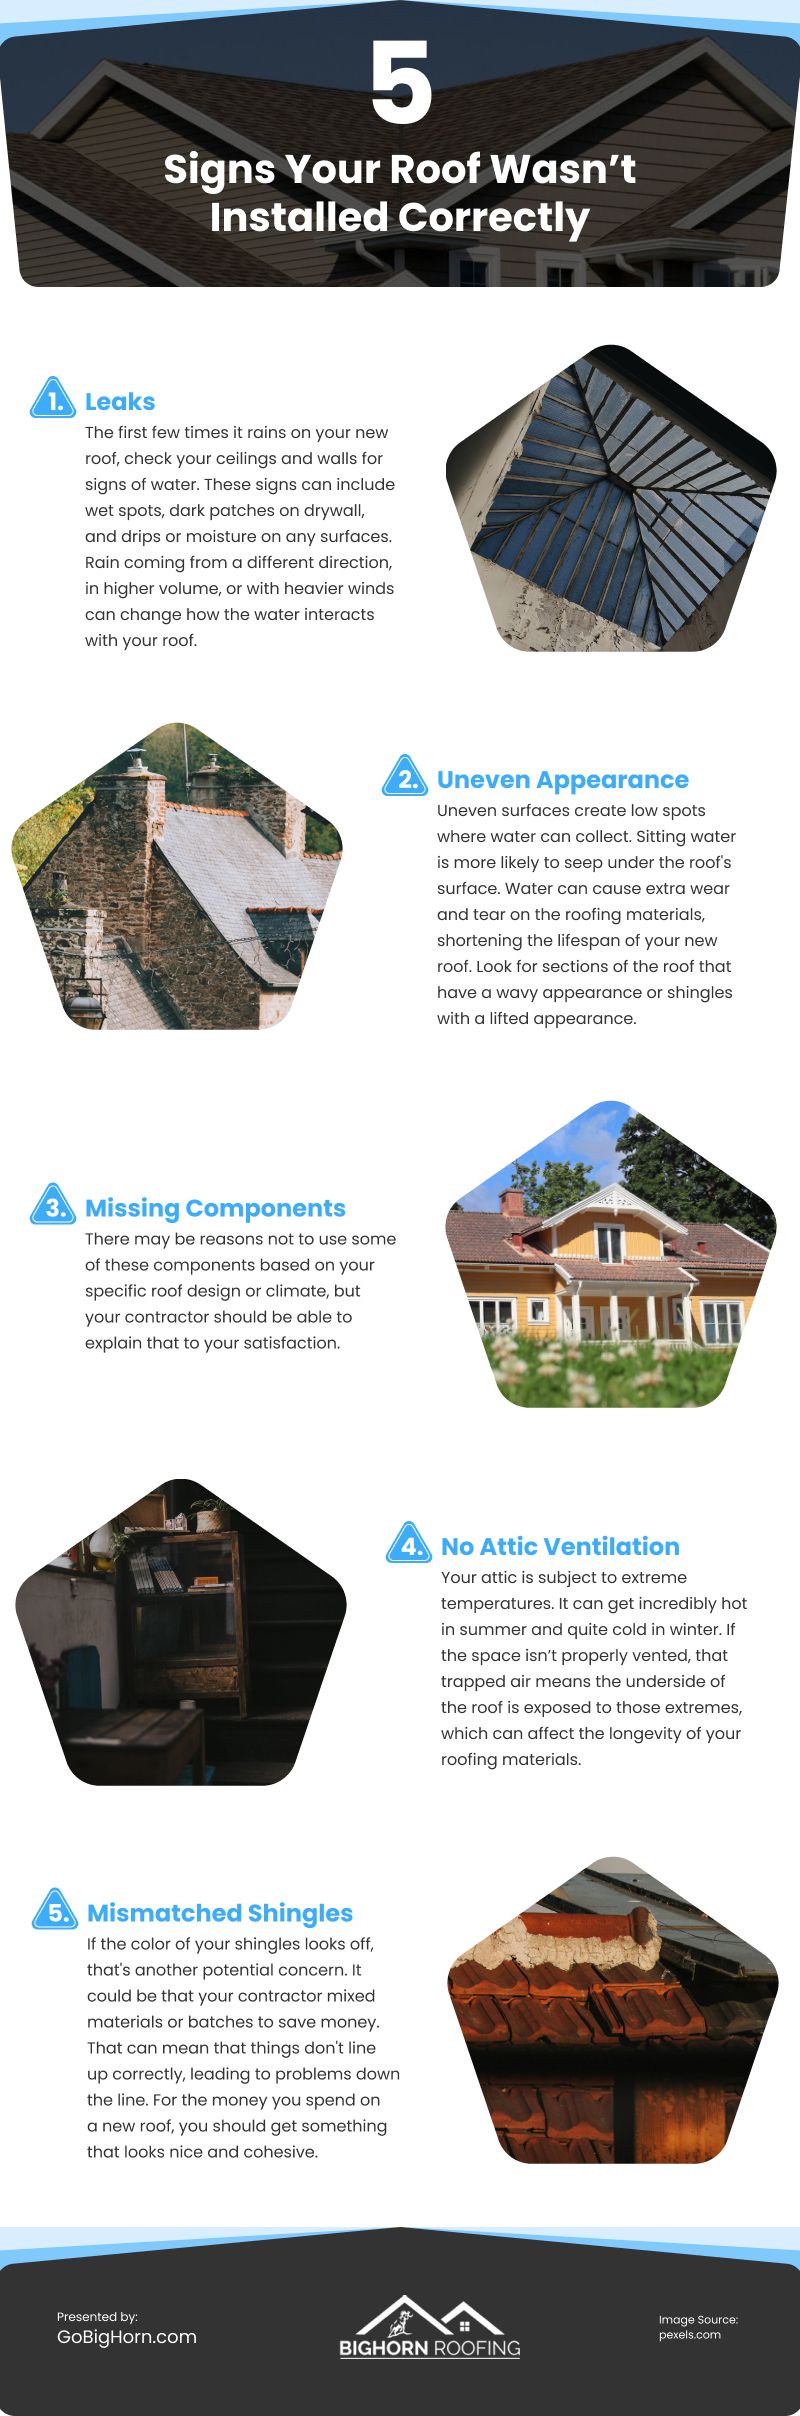 5 Signs Your Roof Wasn't Installed Correctly Infographic